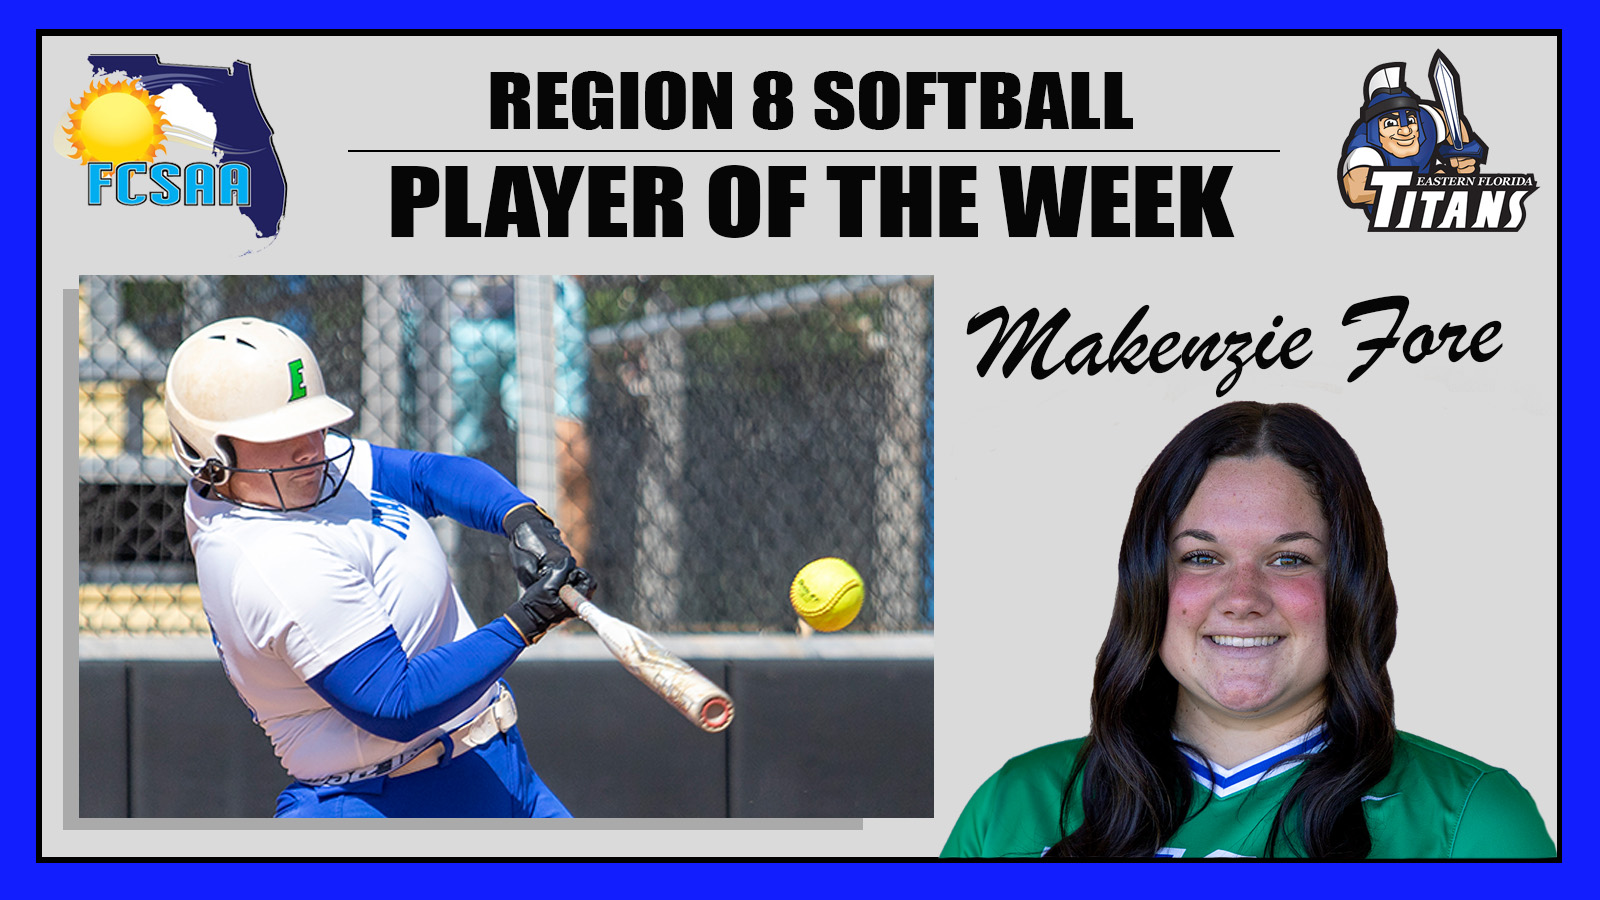 Makenzie Fore named the Region 8 Softball Player of the Week